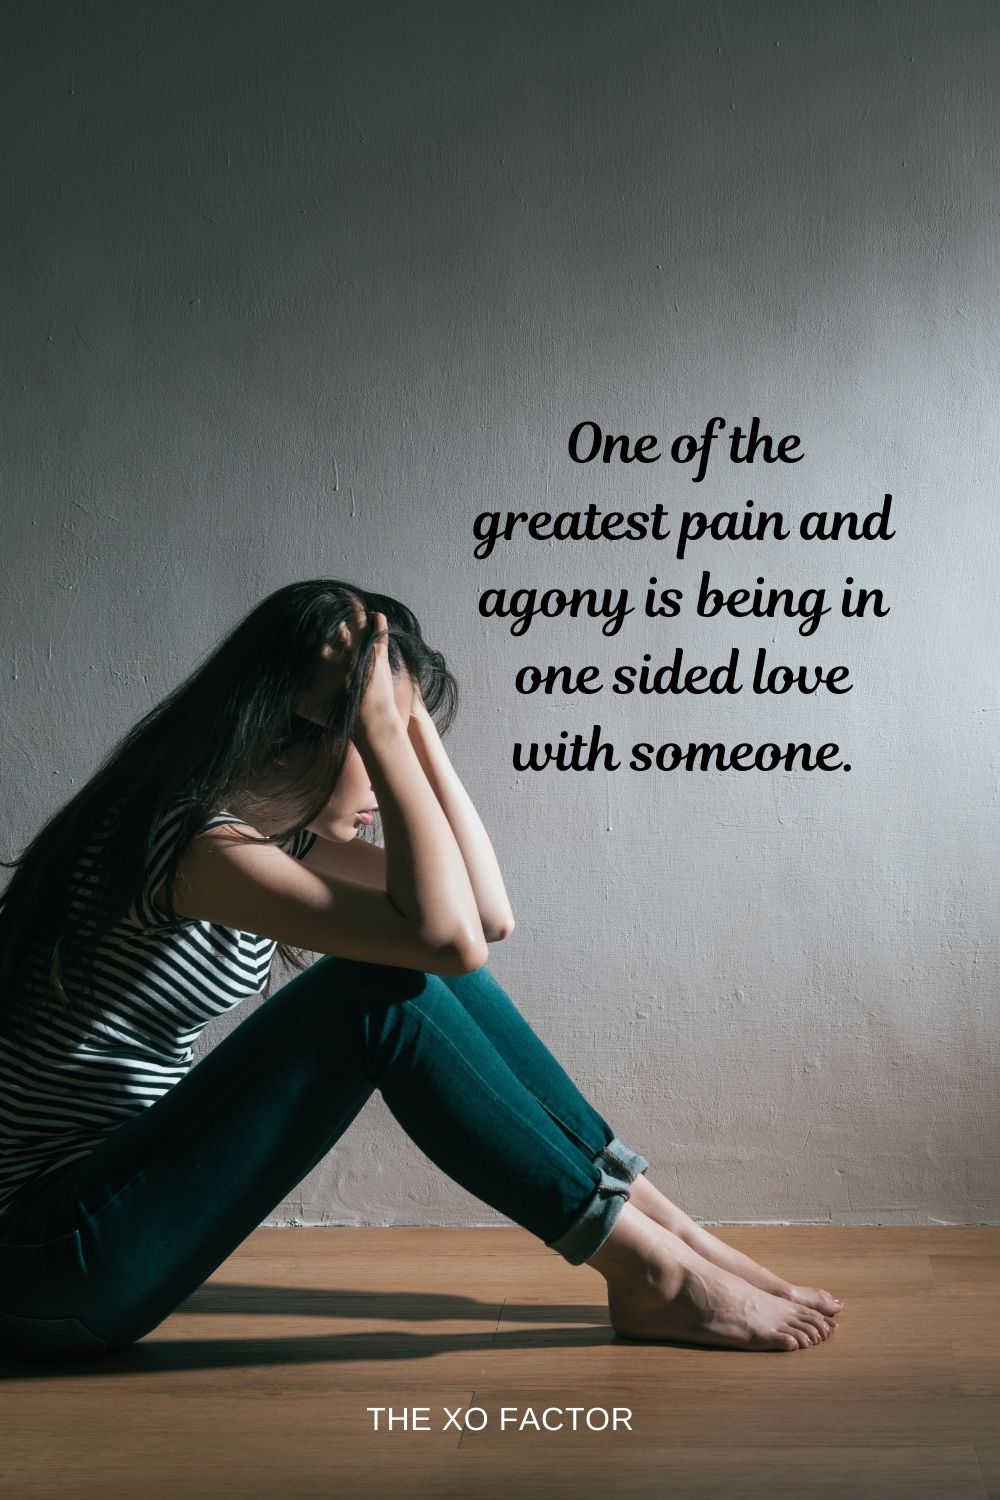 One of the greatest pain and agony is being in one sided love with someone.